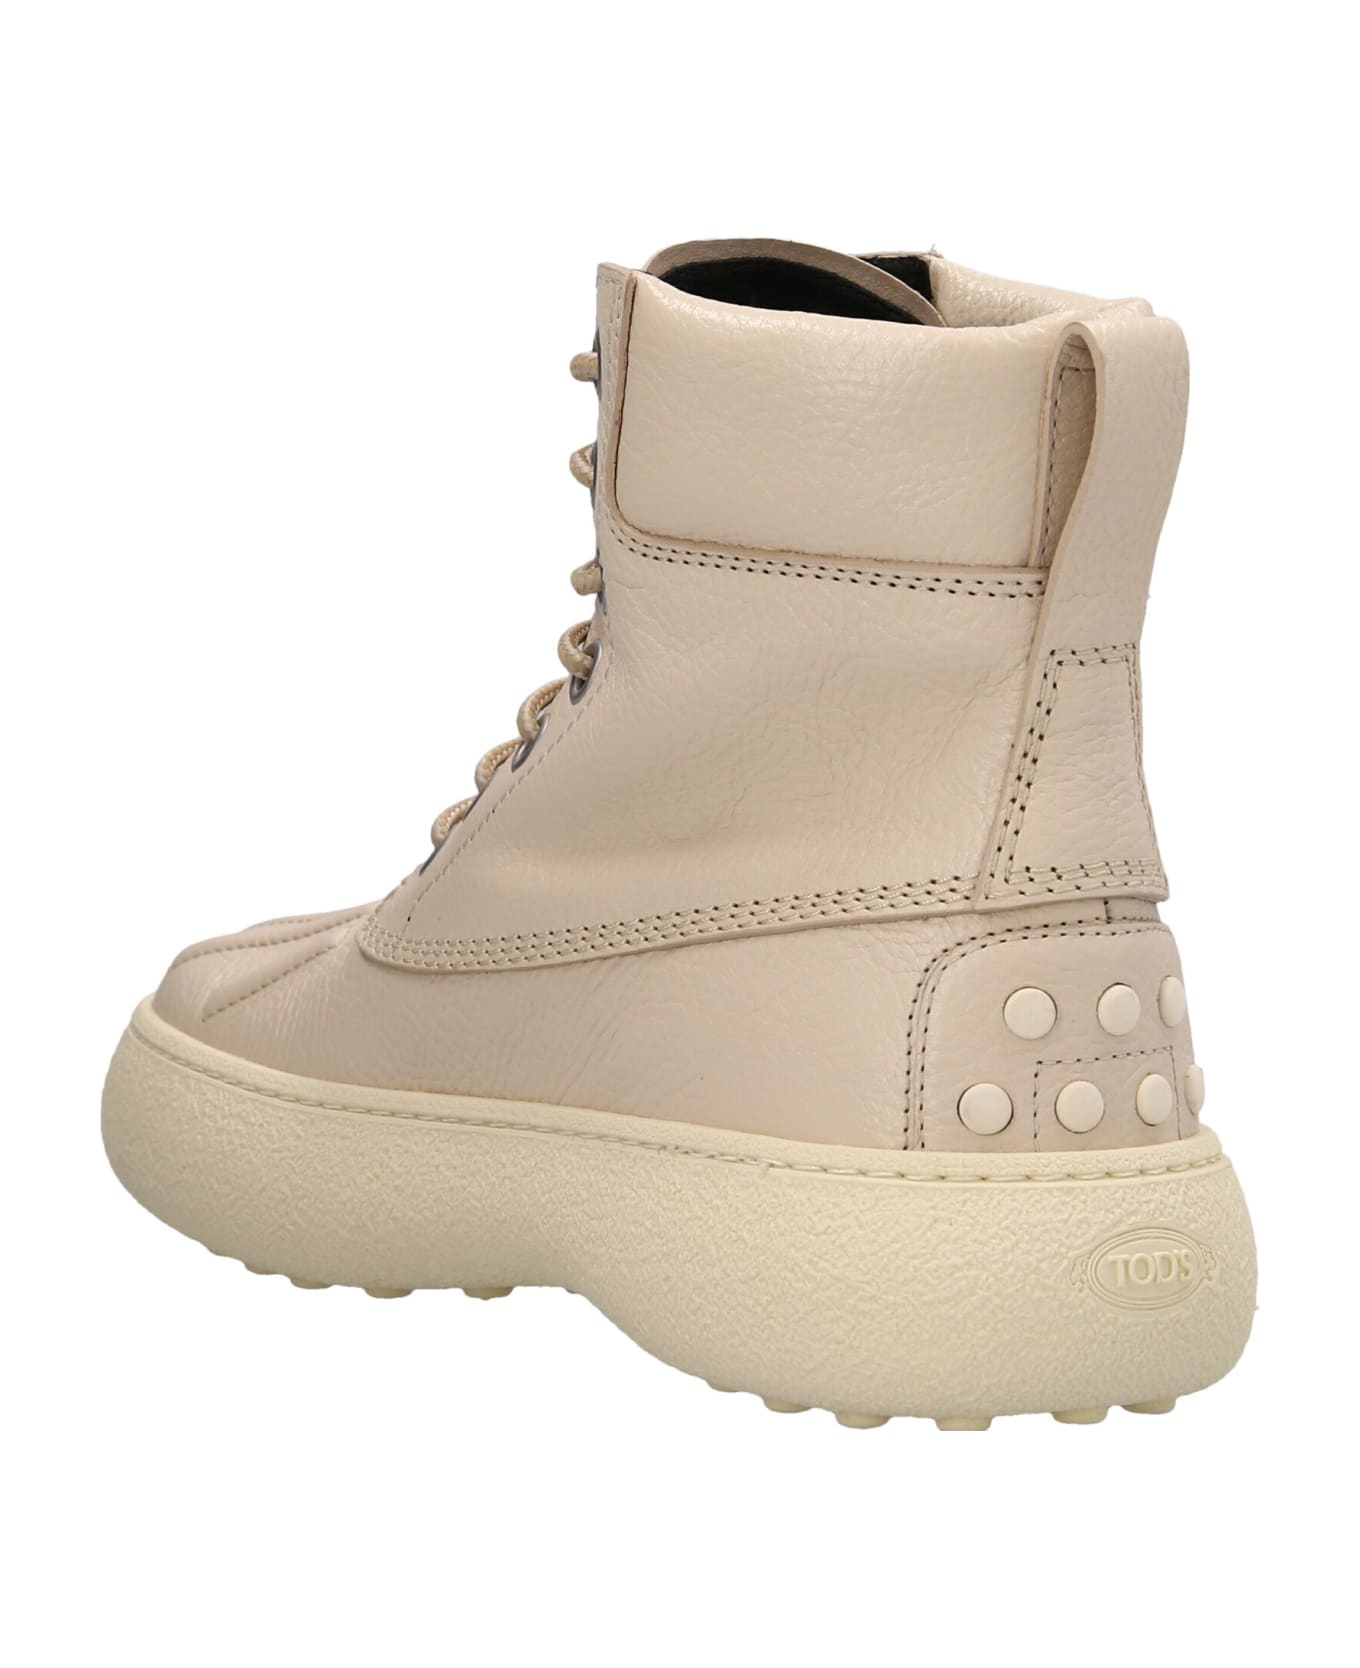 Moncler Genius Ankle Boot 'winter Gommino Mid' Moncler Genius X Palm Angels X Tod's - Beige